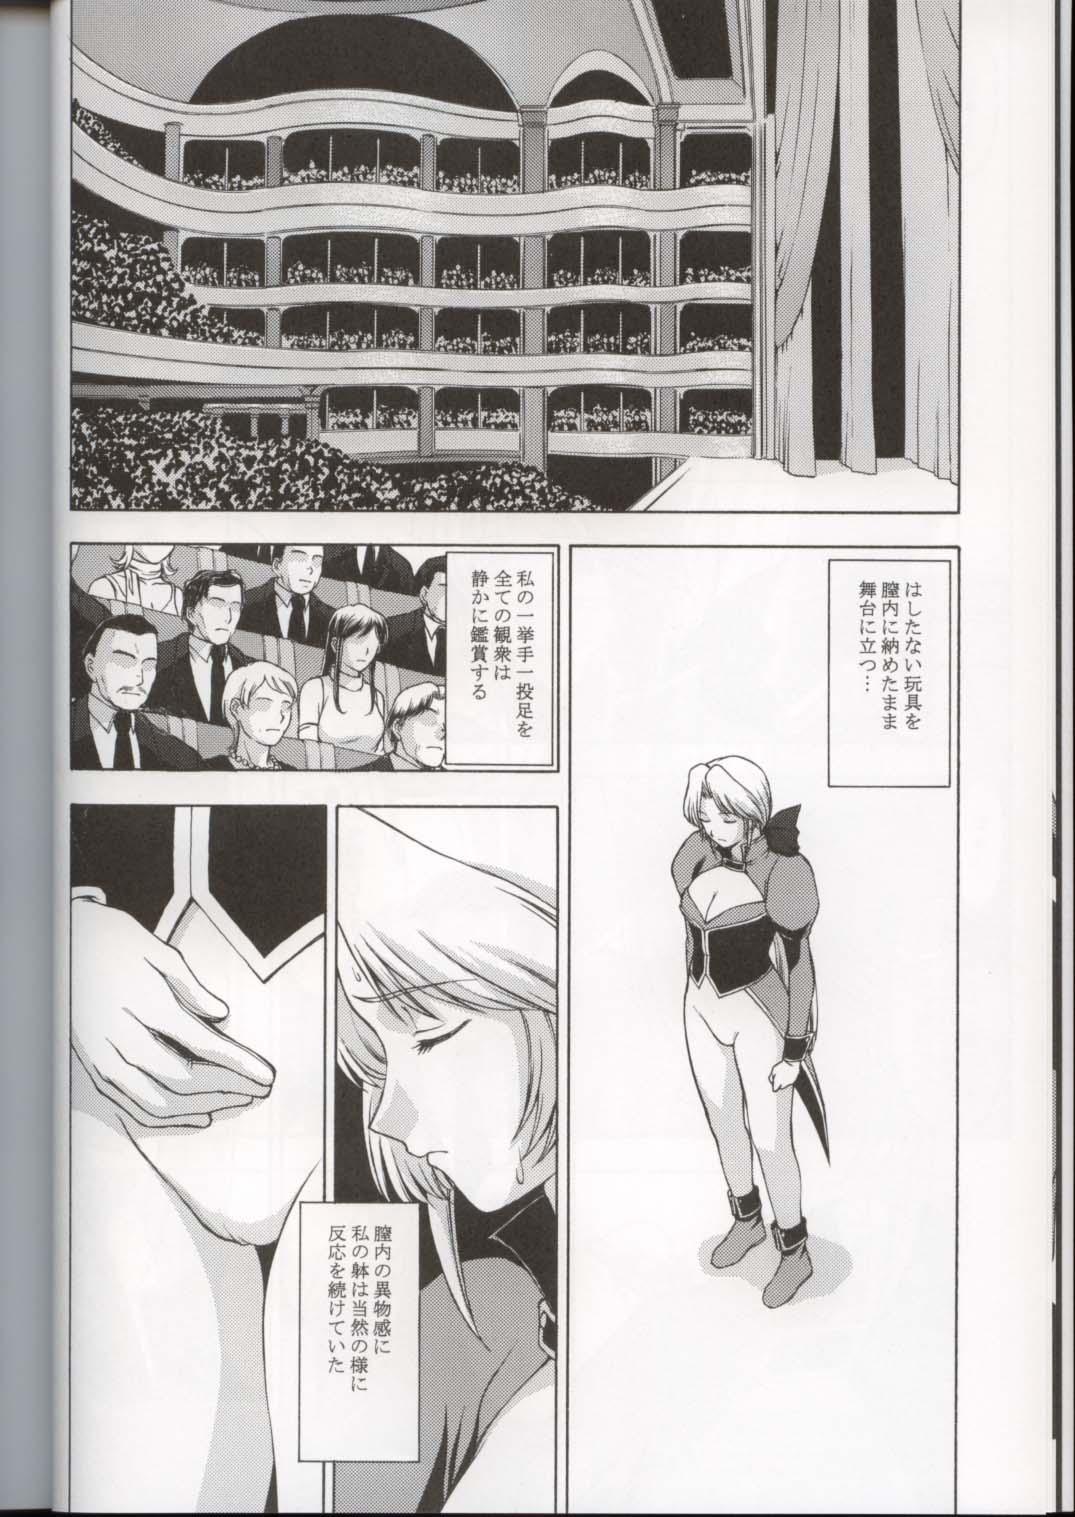 Jerking Off Utahime no Shouzou 3 - Dead or alive Youth Porn - Page 10